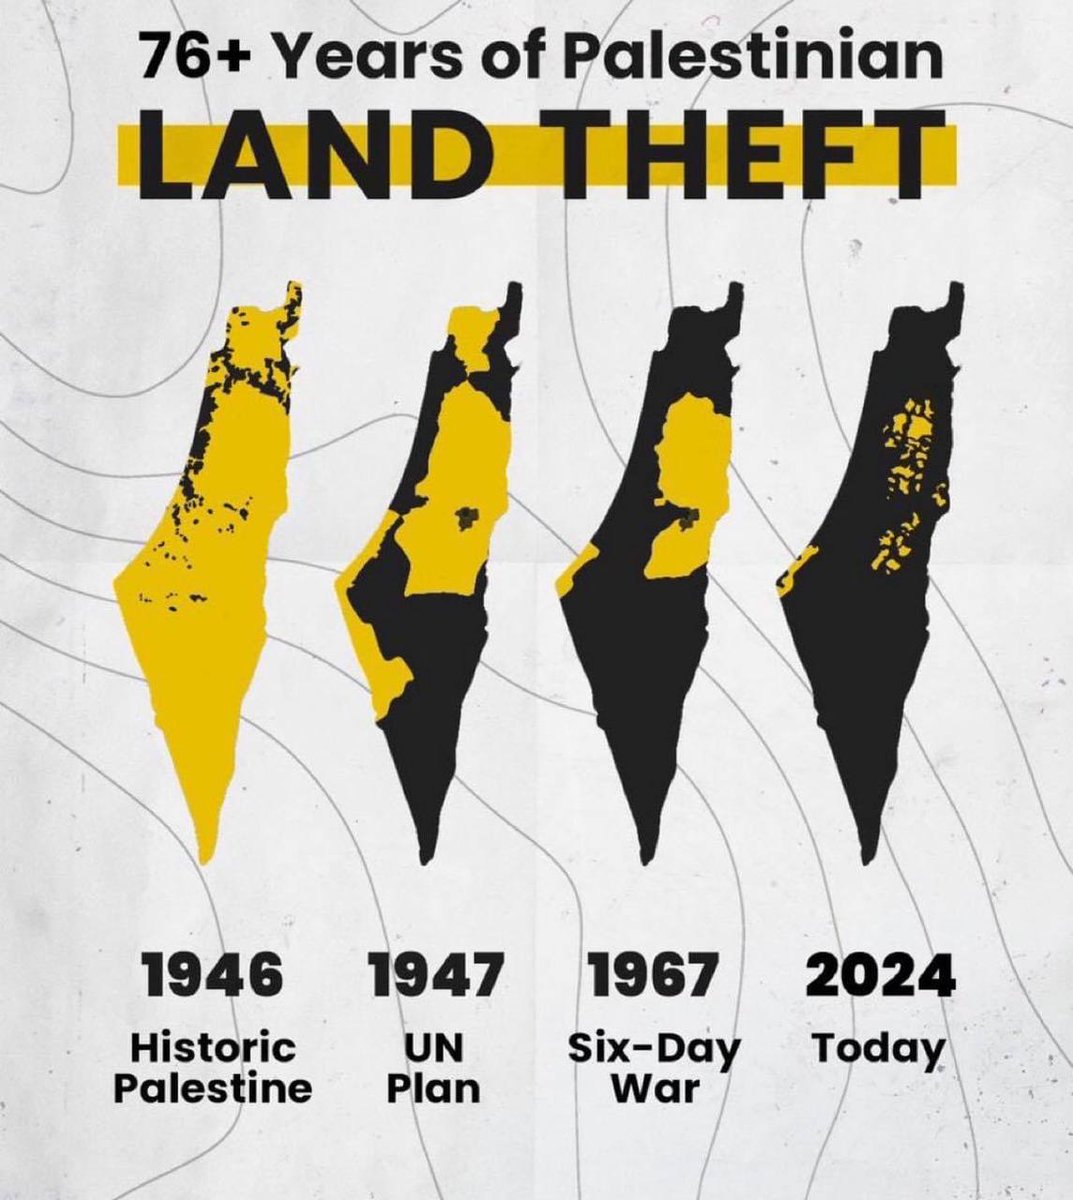 76+ years of theft of Palestinian lands...